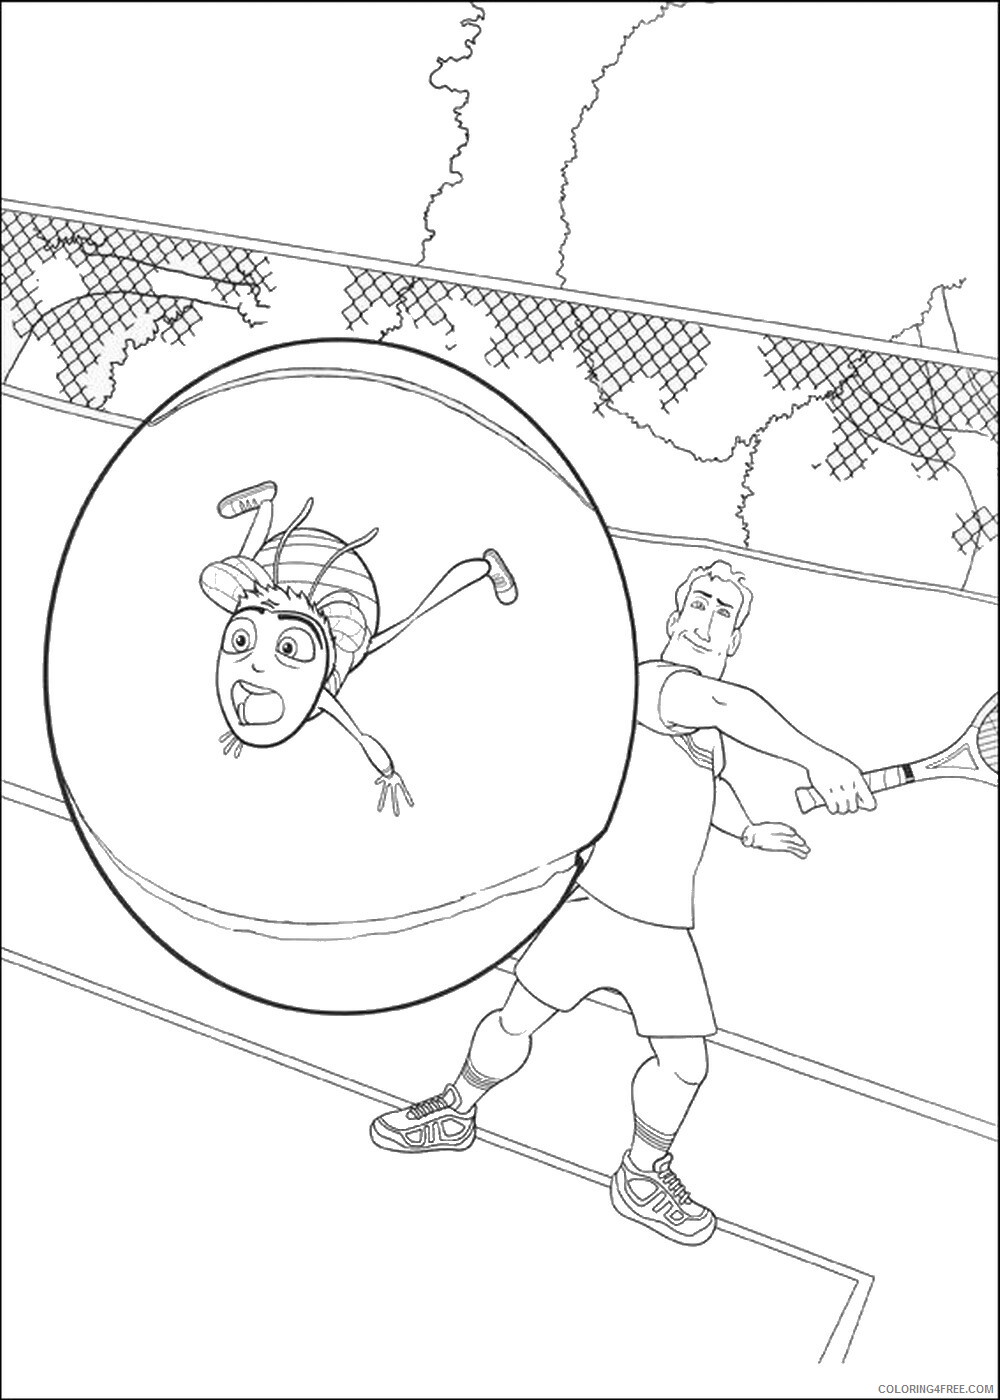 Bee Movie Coloring Pages TV Film bee_movie_cl11 Printable 2020 00703 Coloring4free